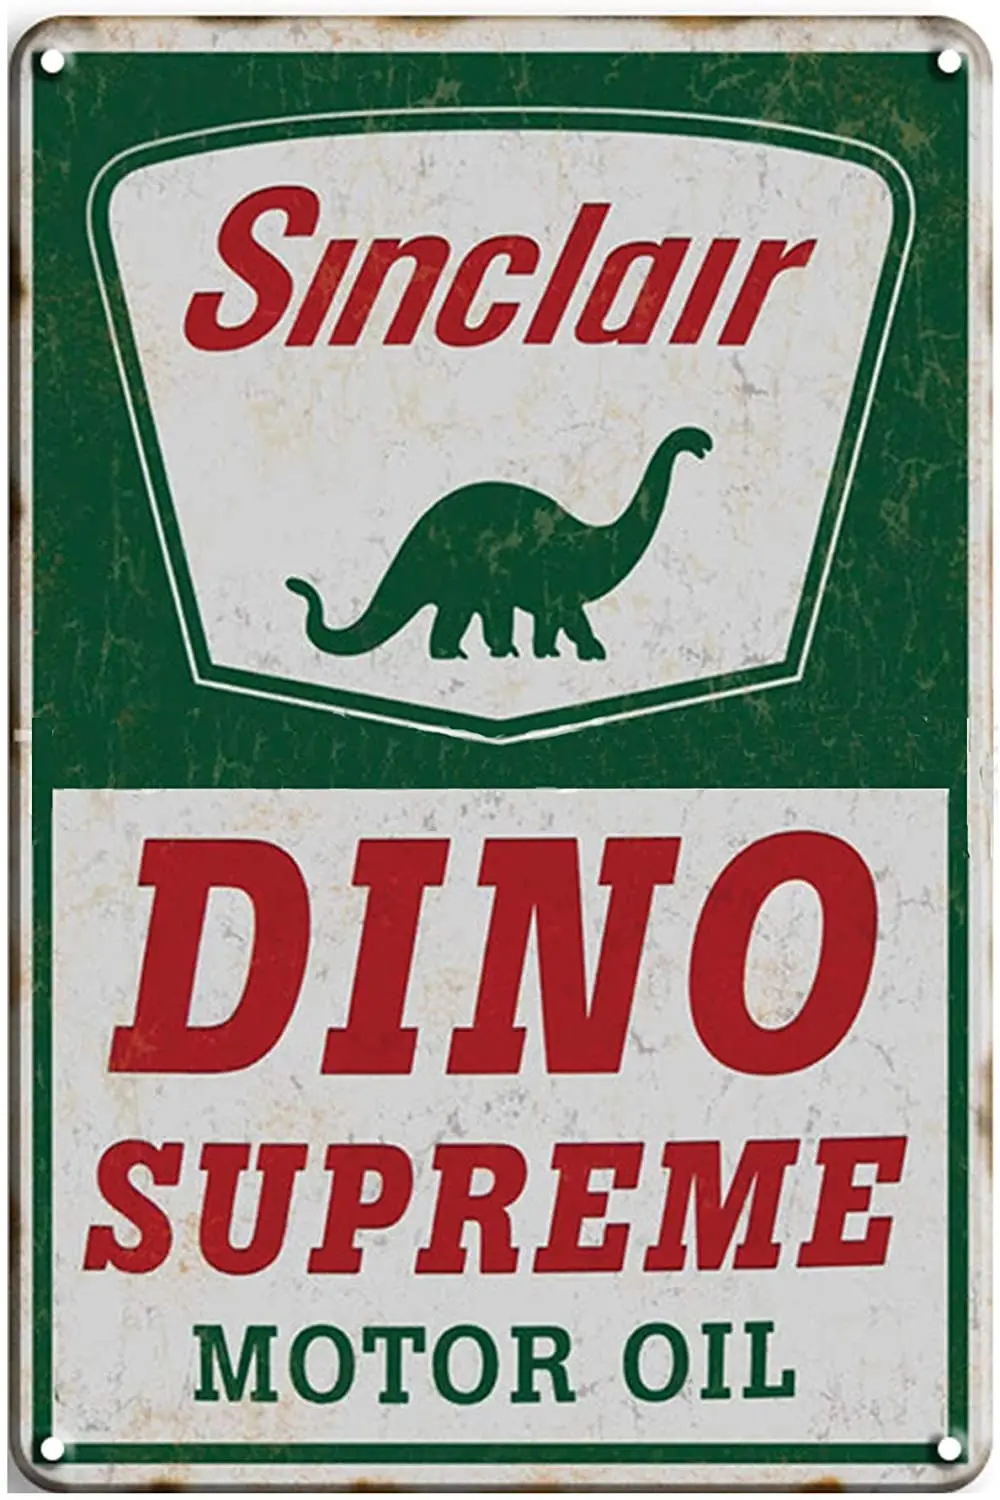 

FSTIKO Sinclair Dino Motor Oil Gas Station Signs Vintage Metal Sign Motor Oil Gasoline Tin Signs for Home Man Cave